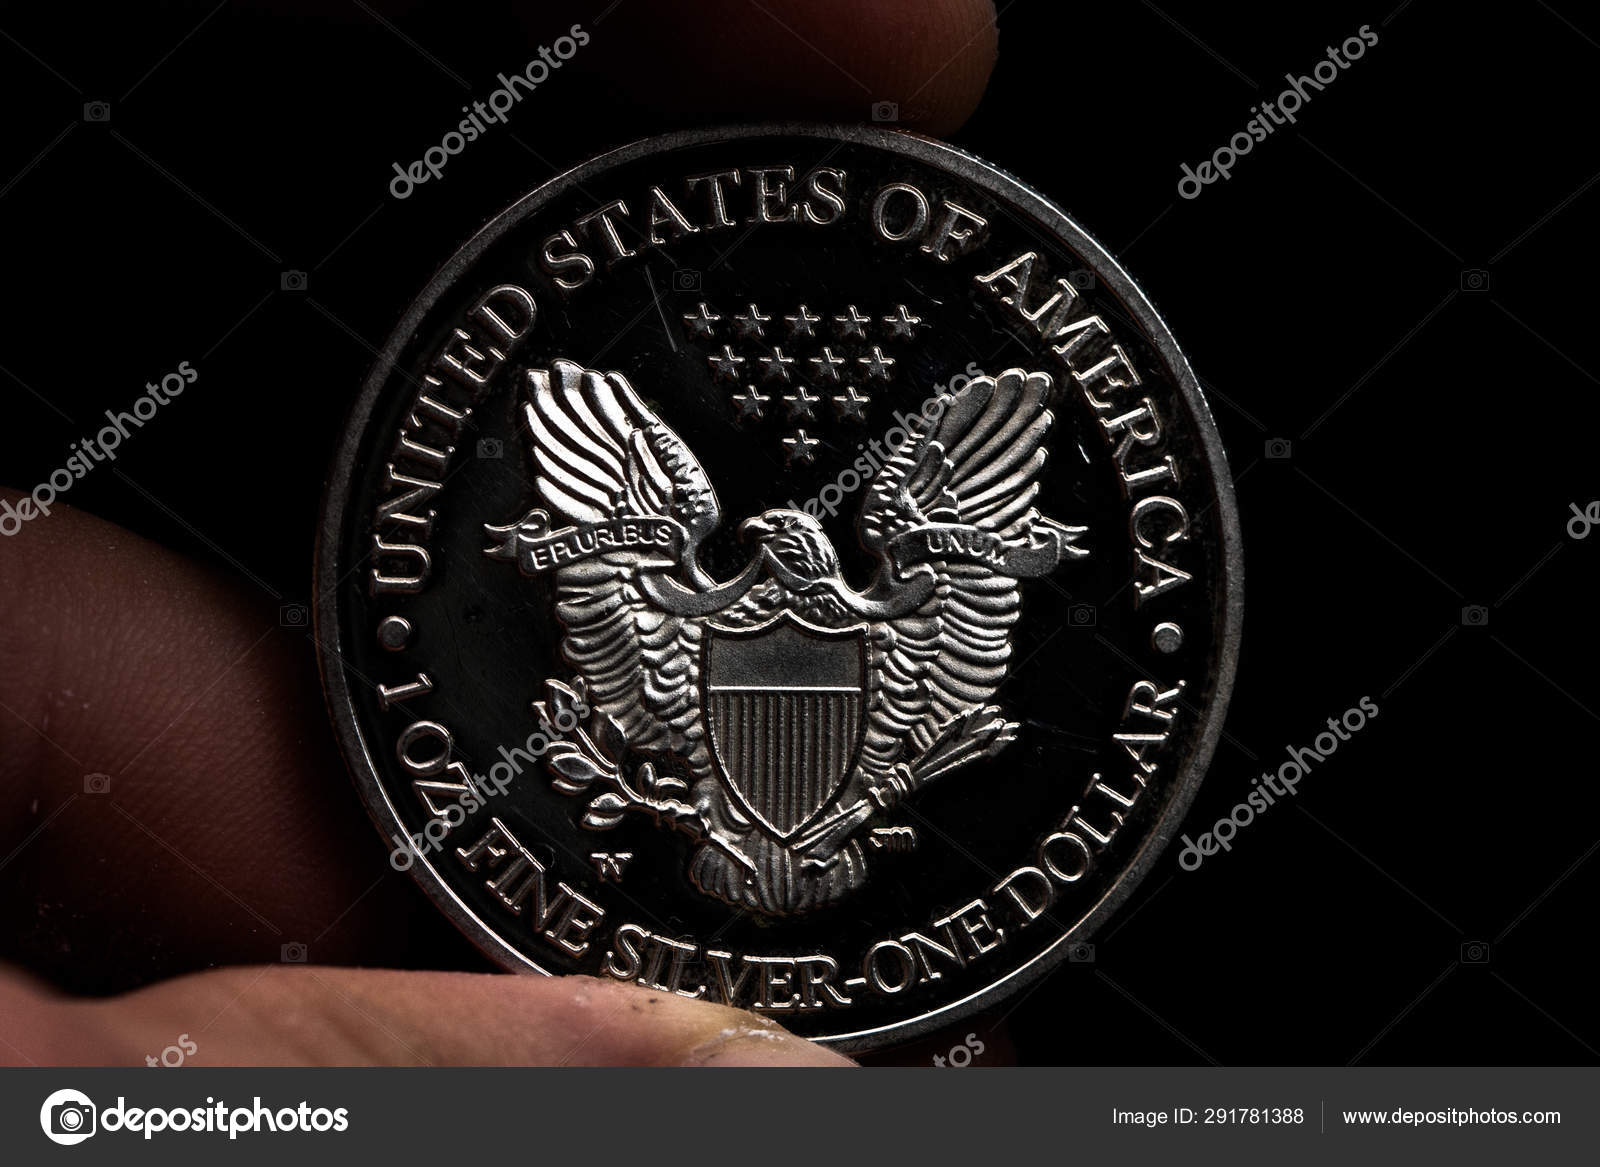 Man S Hand Holding A Silver American Coin Close Up Of A Quarter Dollar Coin Isolated Over Black Bag Dollars Stock Photo C Bredshots 291781388,How To Cook Jasmine Rice